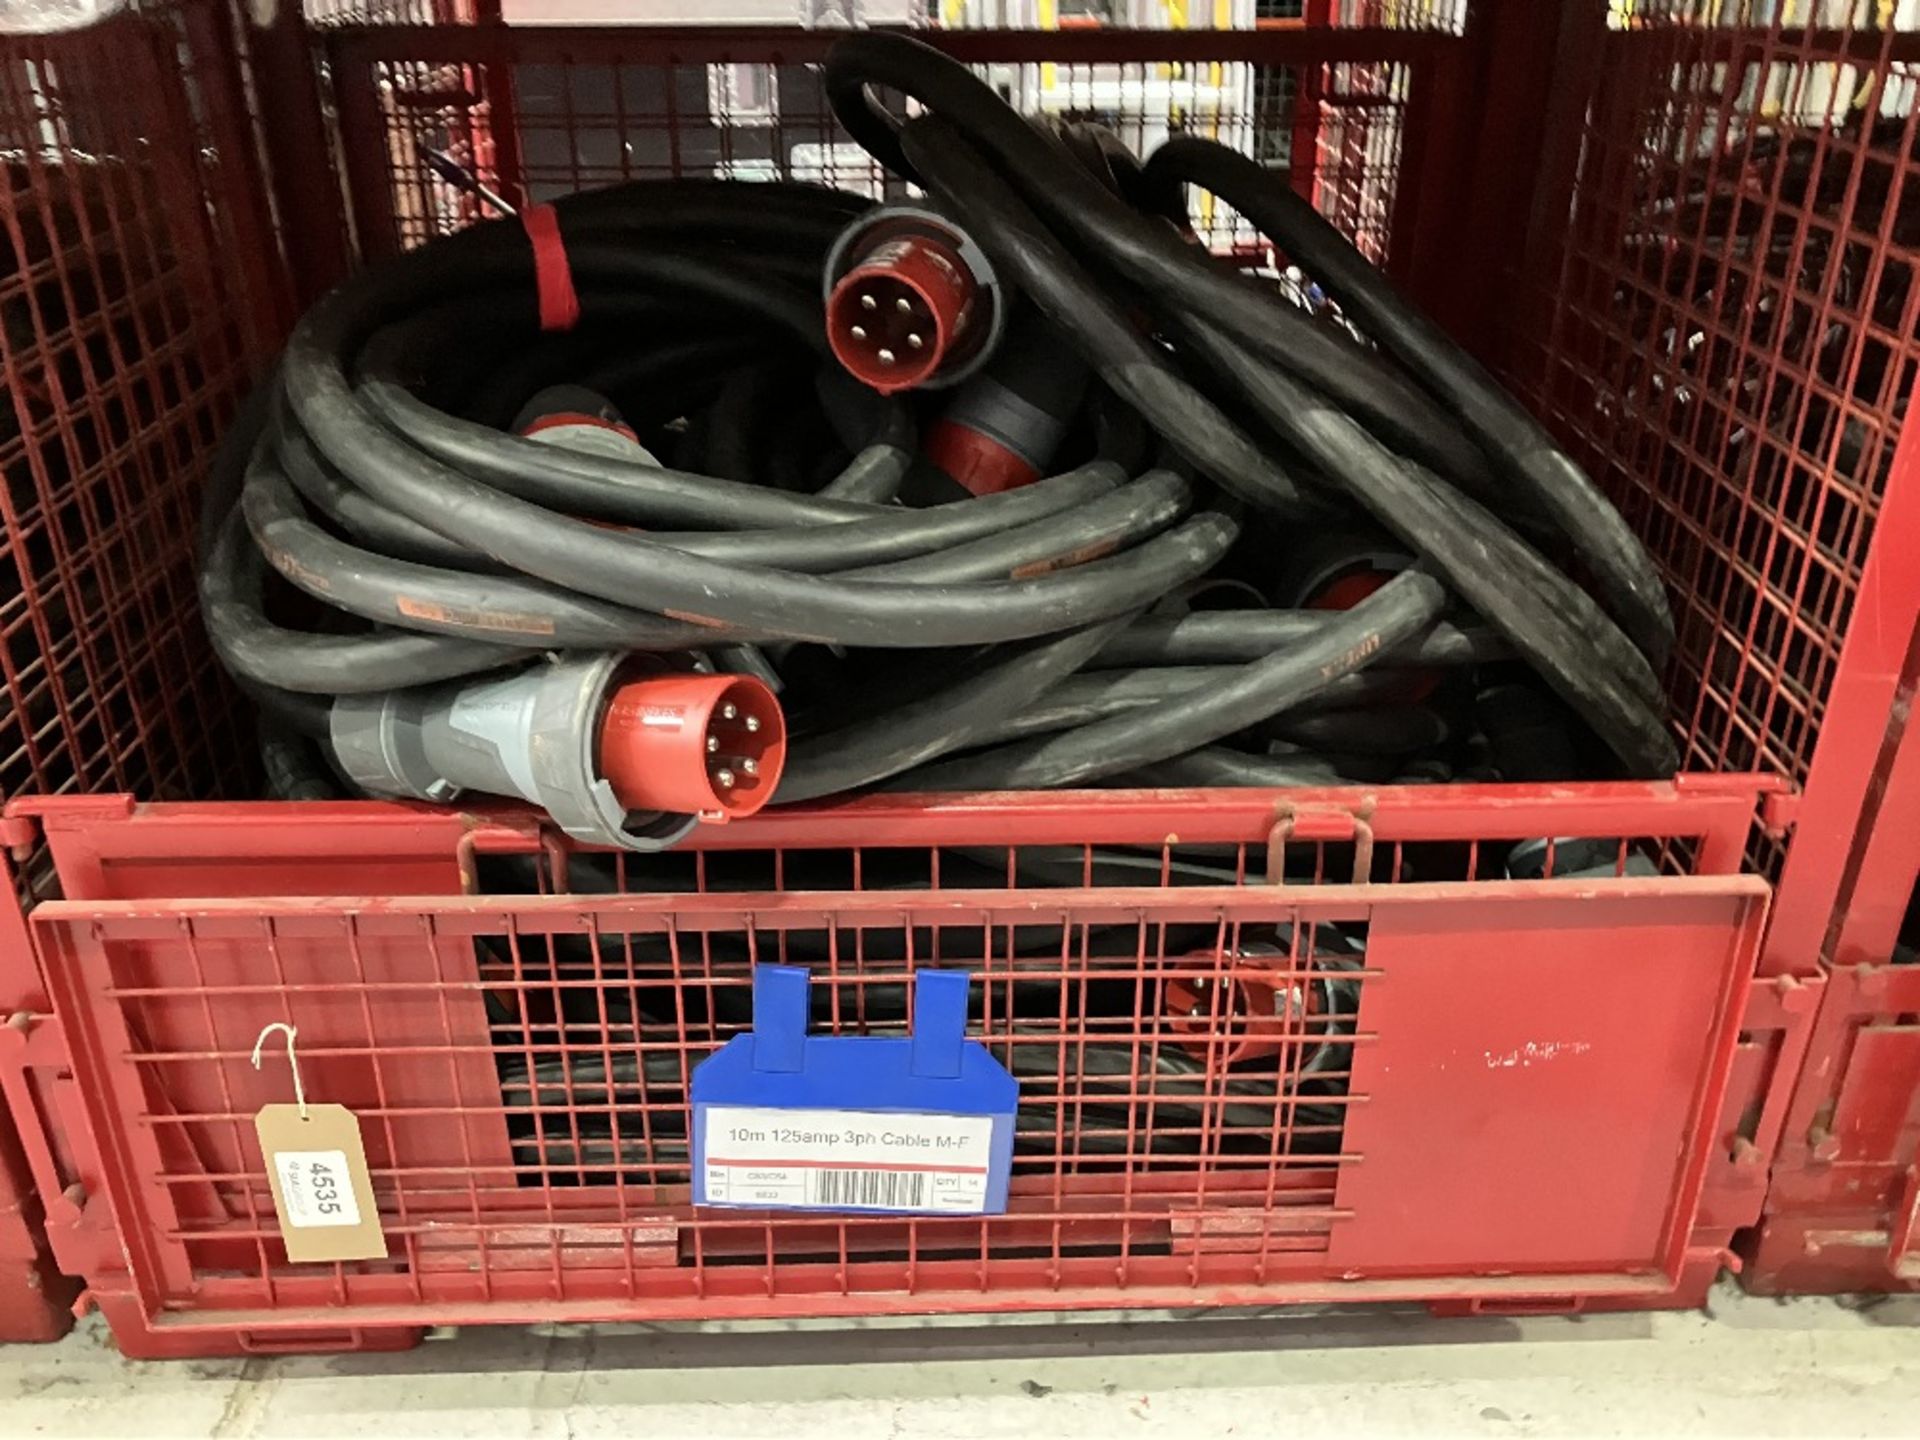 Large Quantity of 10M 125amp 3ph Cable M-F with Steel Fabricated Stillage - Image 4 of 5